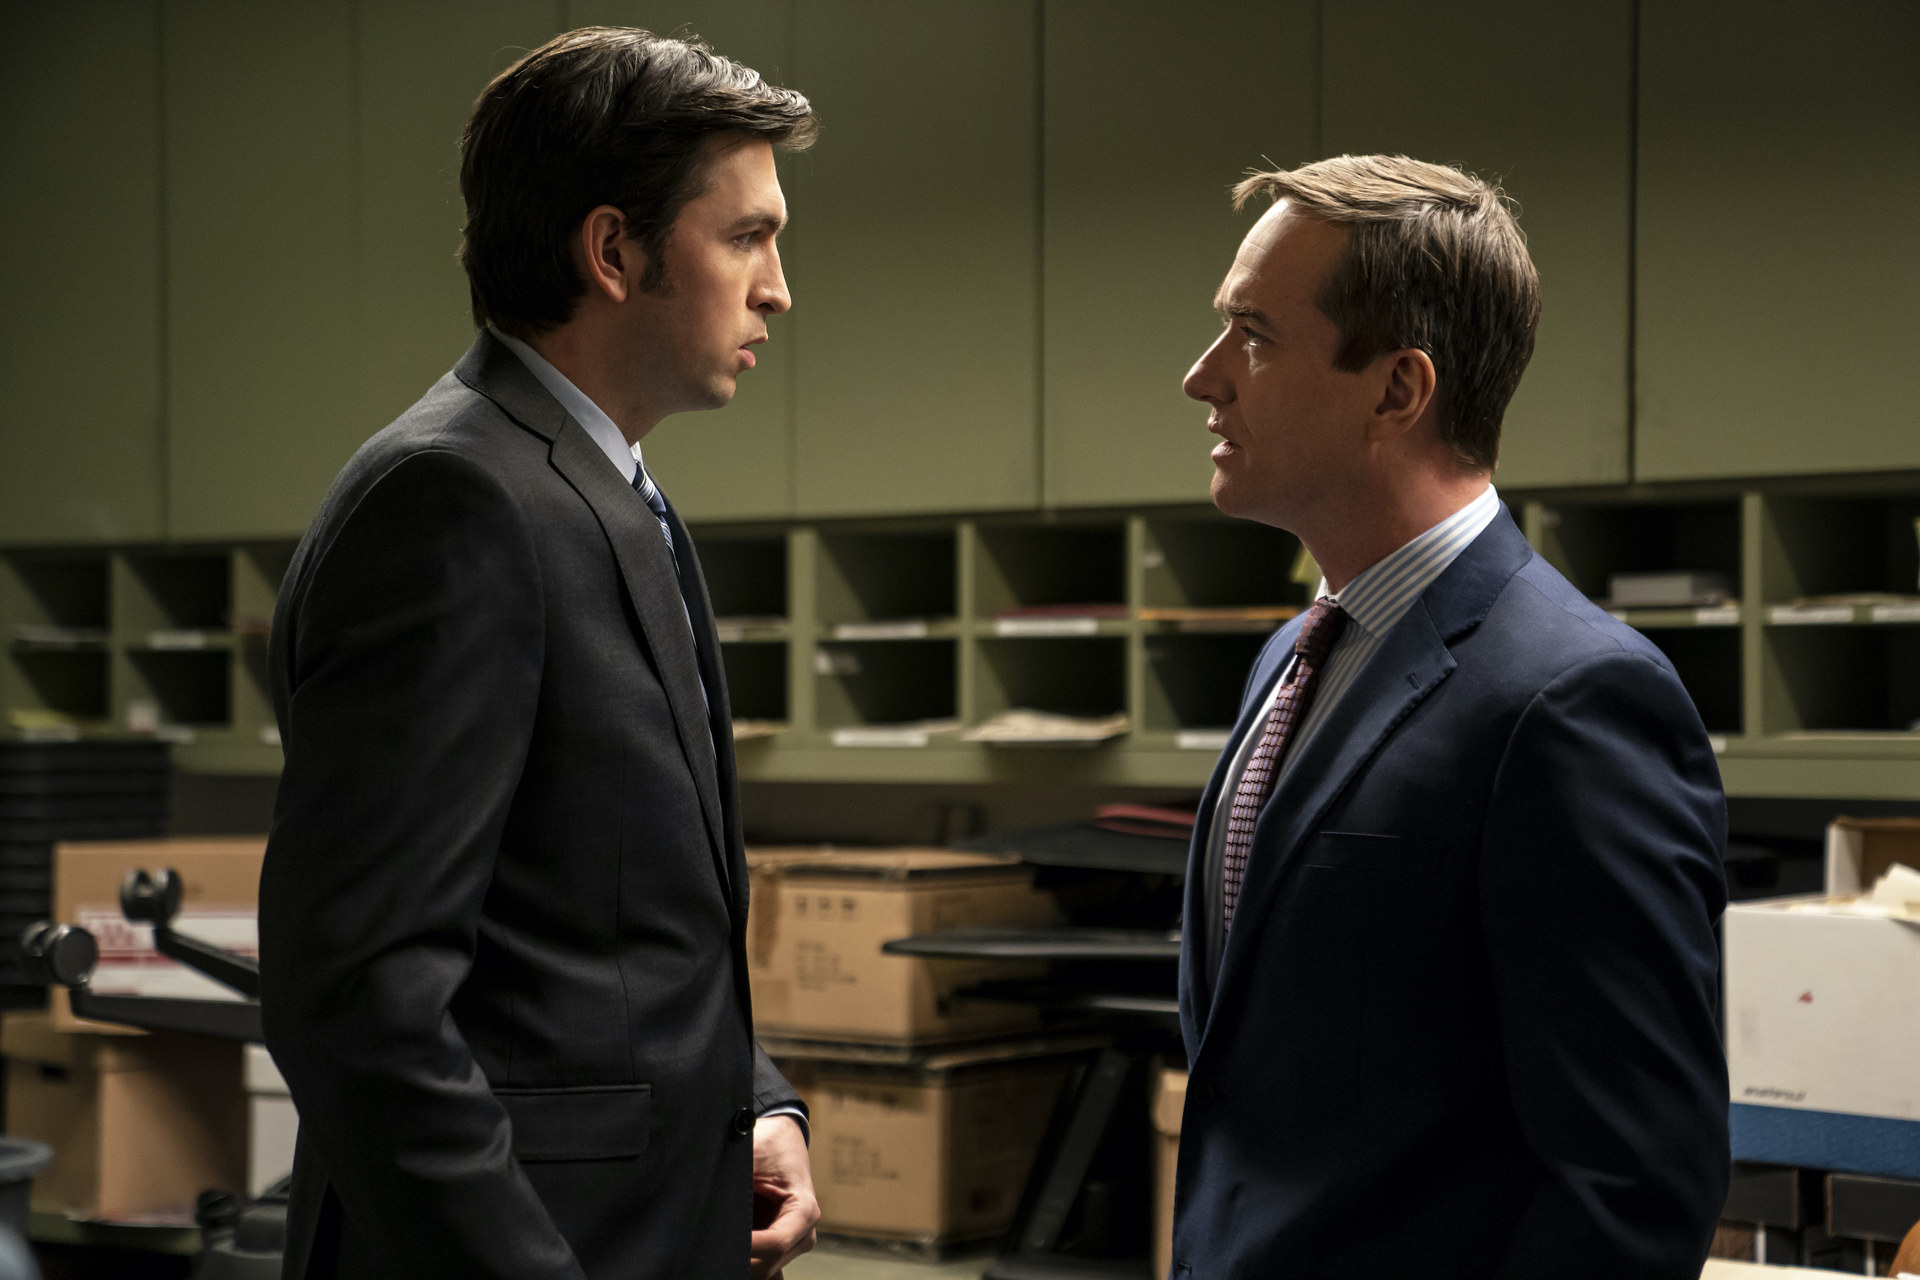 Two men in suits look intensely at each other.